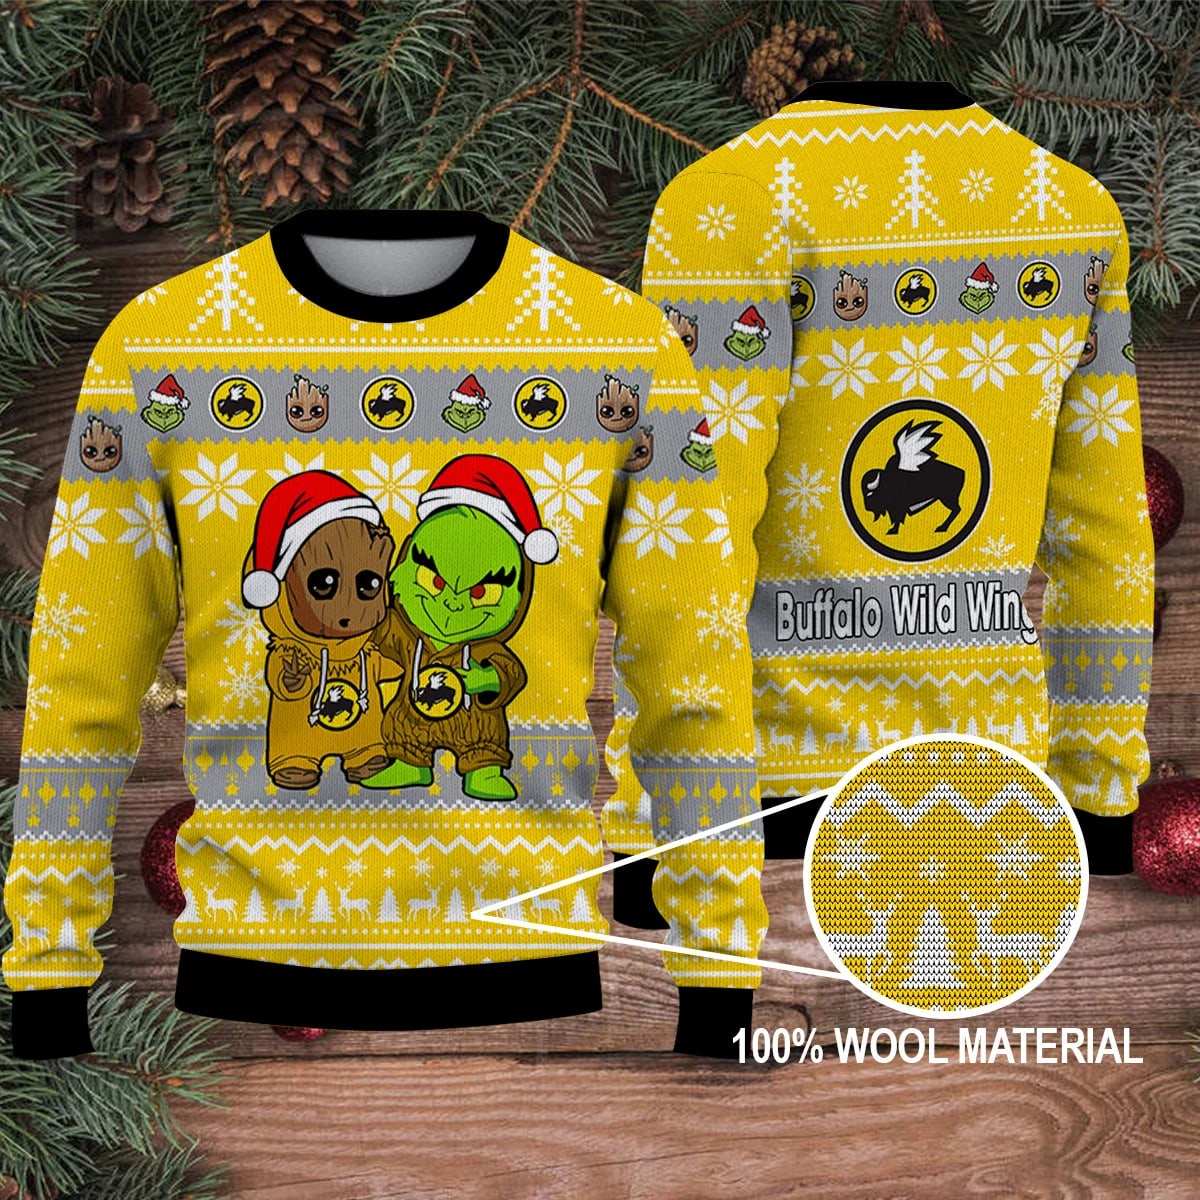 Grinch Movie 2023 The Grinch Merry Christmas Ugly Sweater Buffalo Wild Wings Tokdwc.jpg